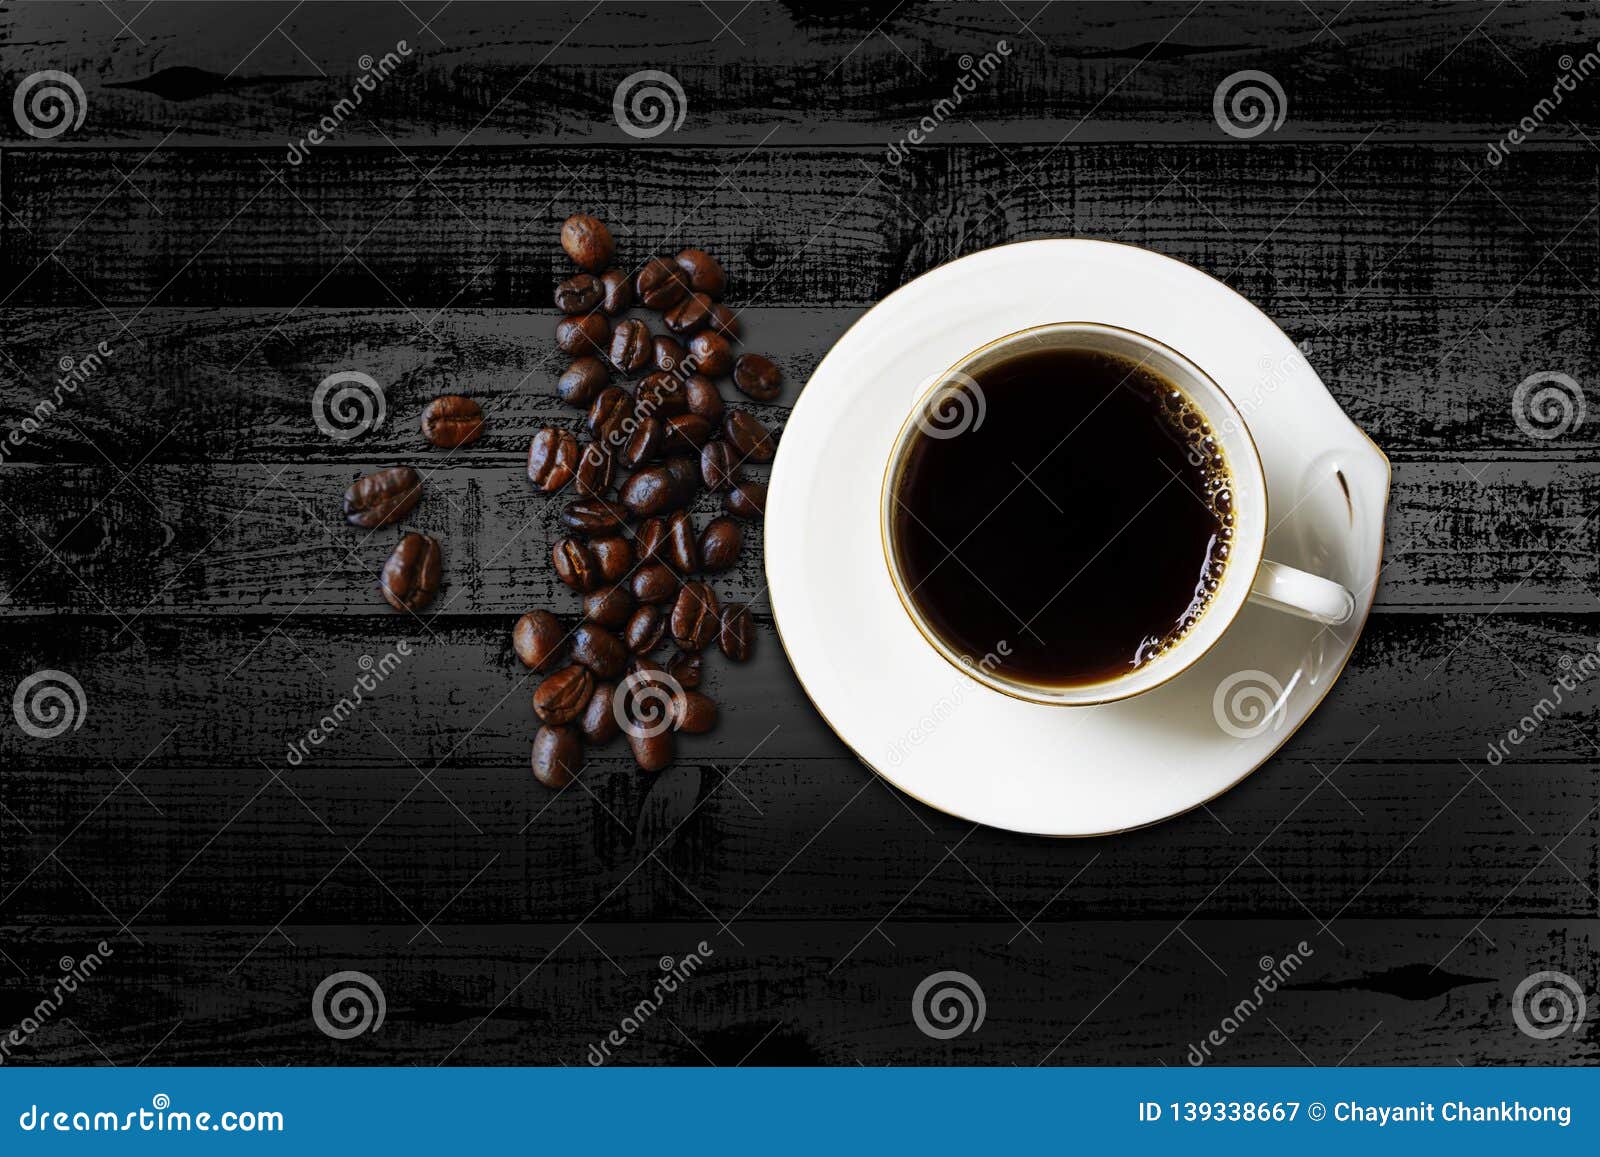 black coffee in the cup on wood dark table with copy space